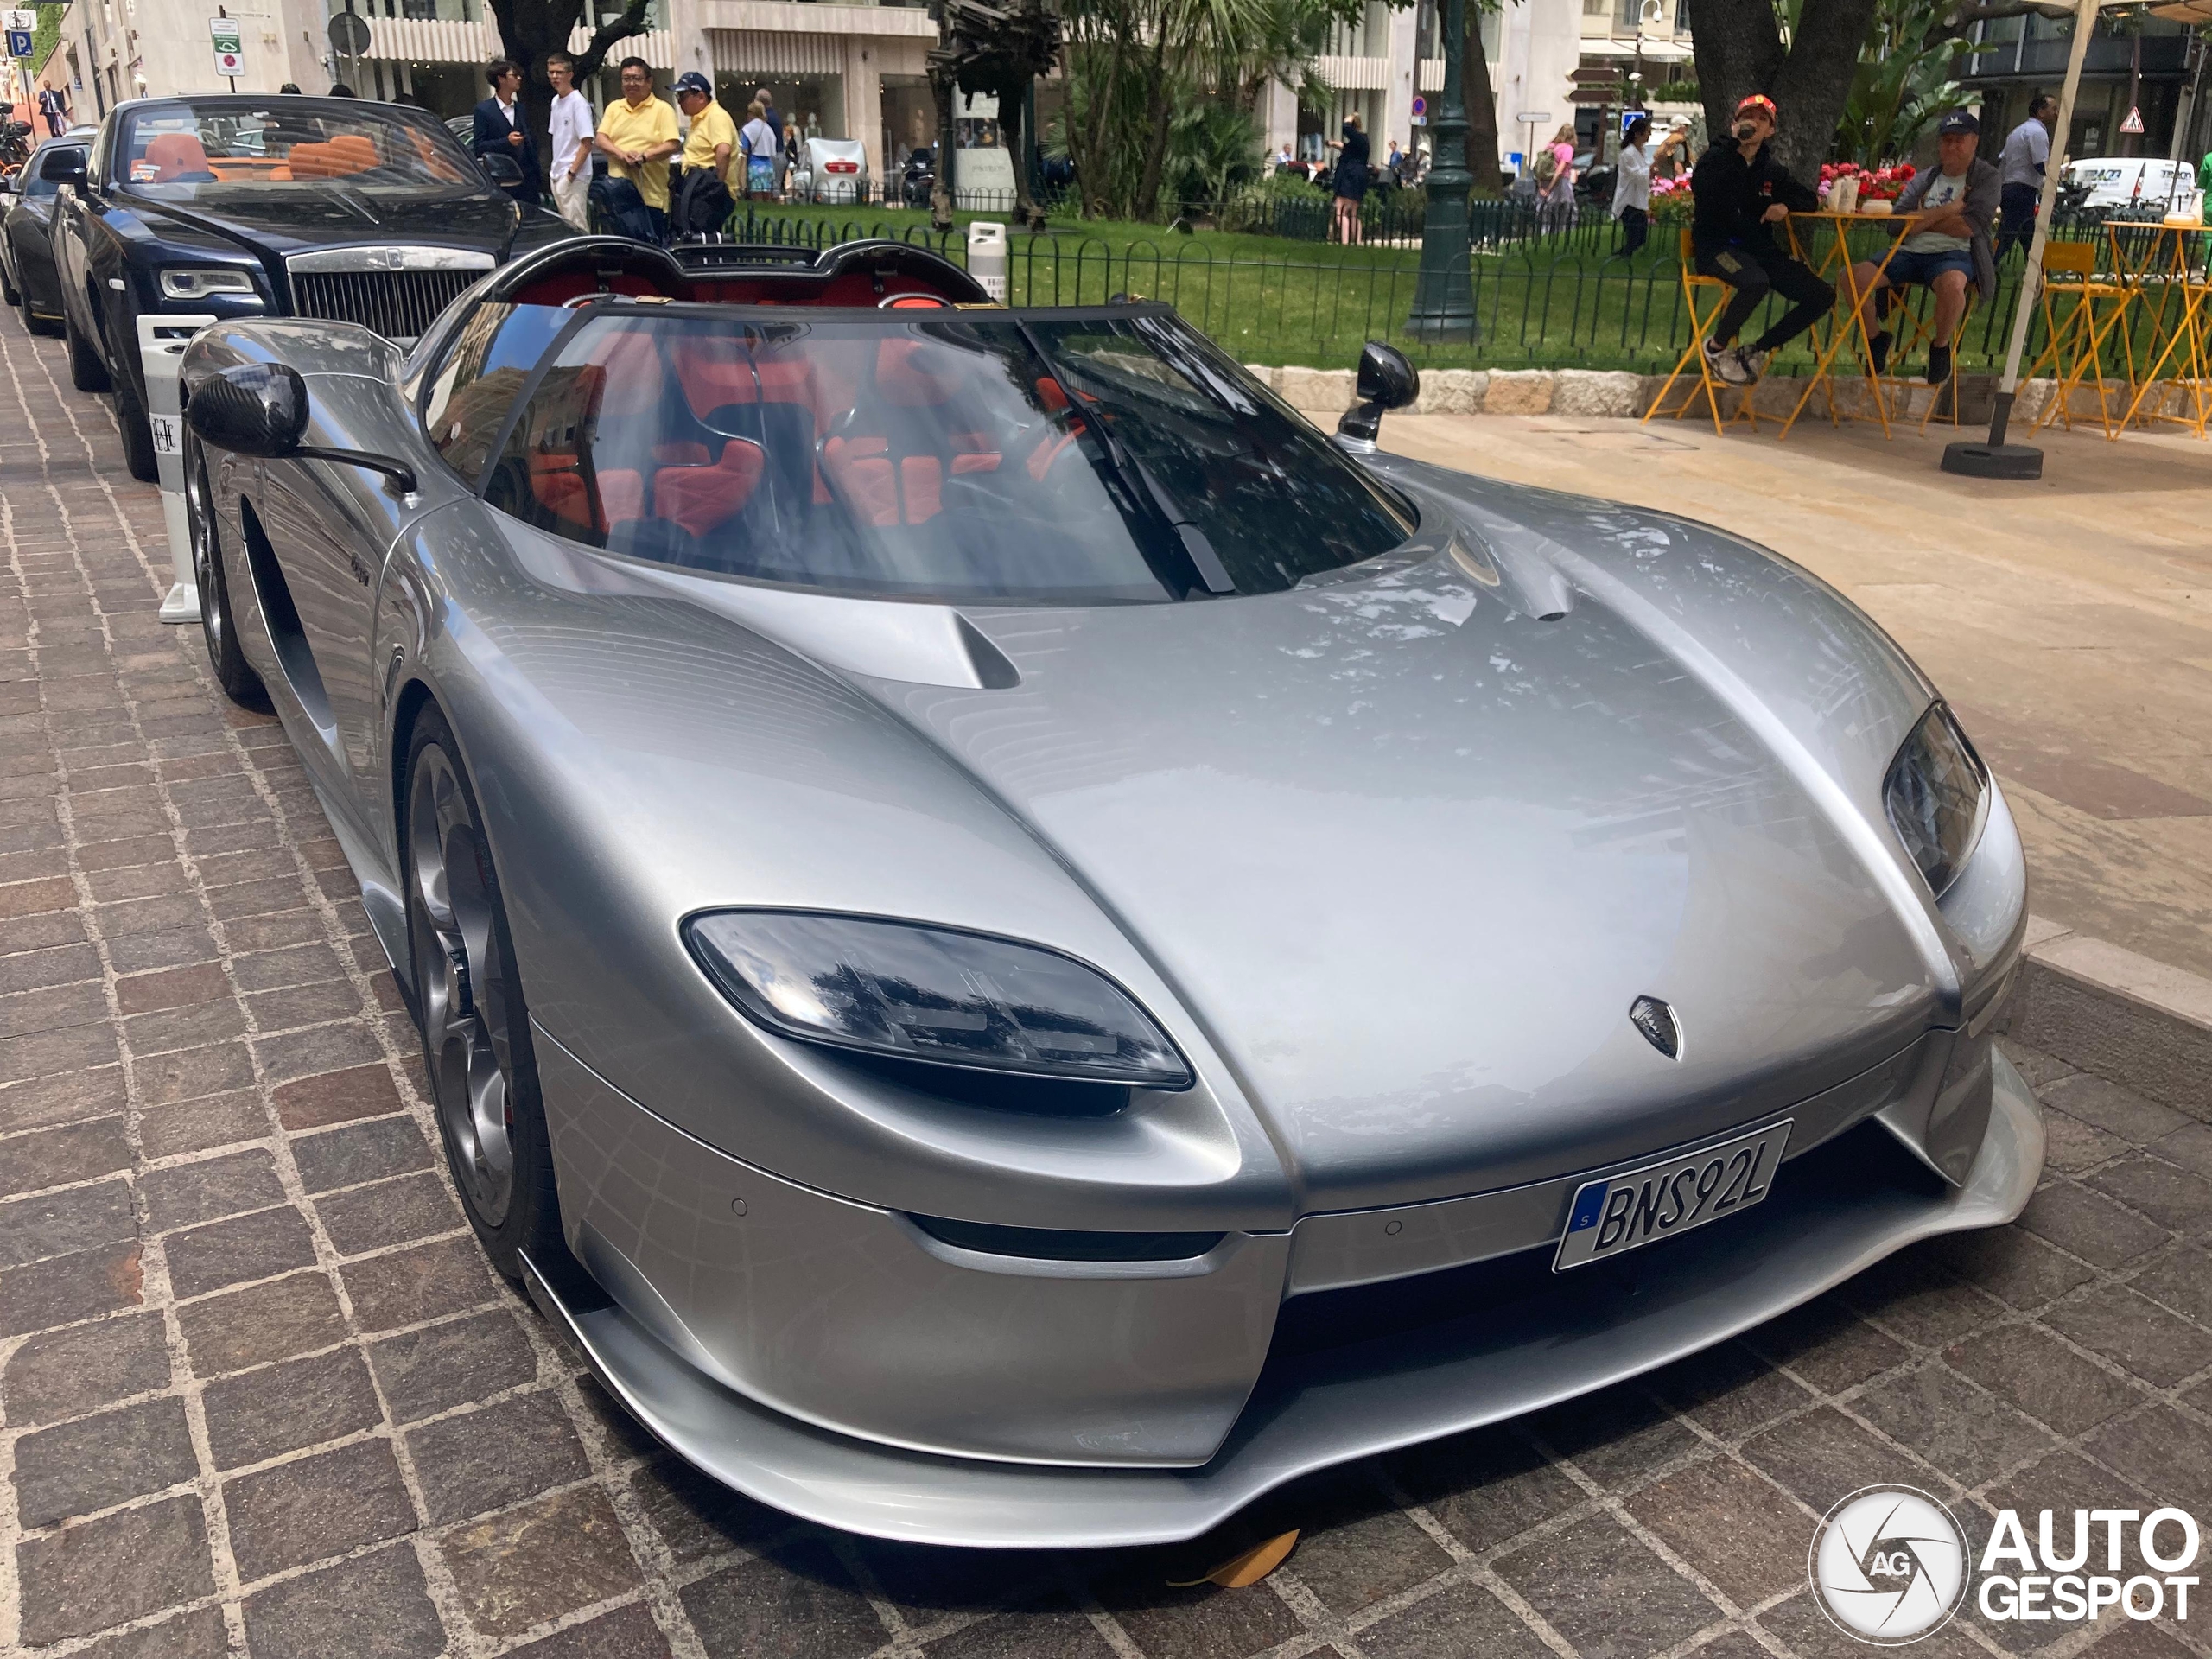 The CC850 now also shows up in Monaco